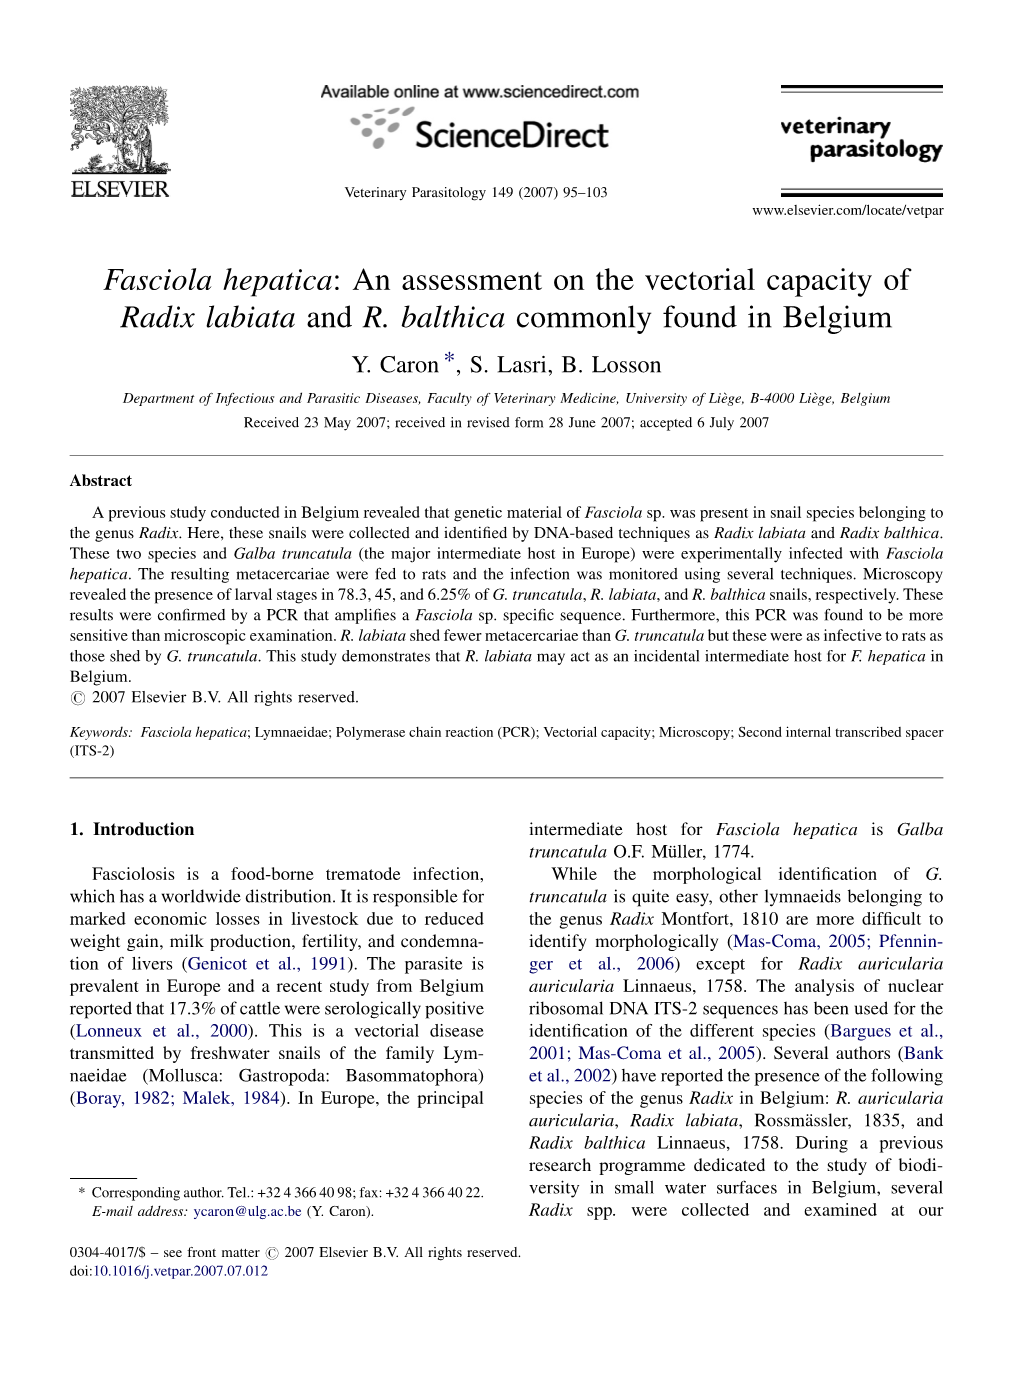 Fasciola Hepatica: an Assessment on the Vectorial Capacity of Radix Labiata and R